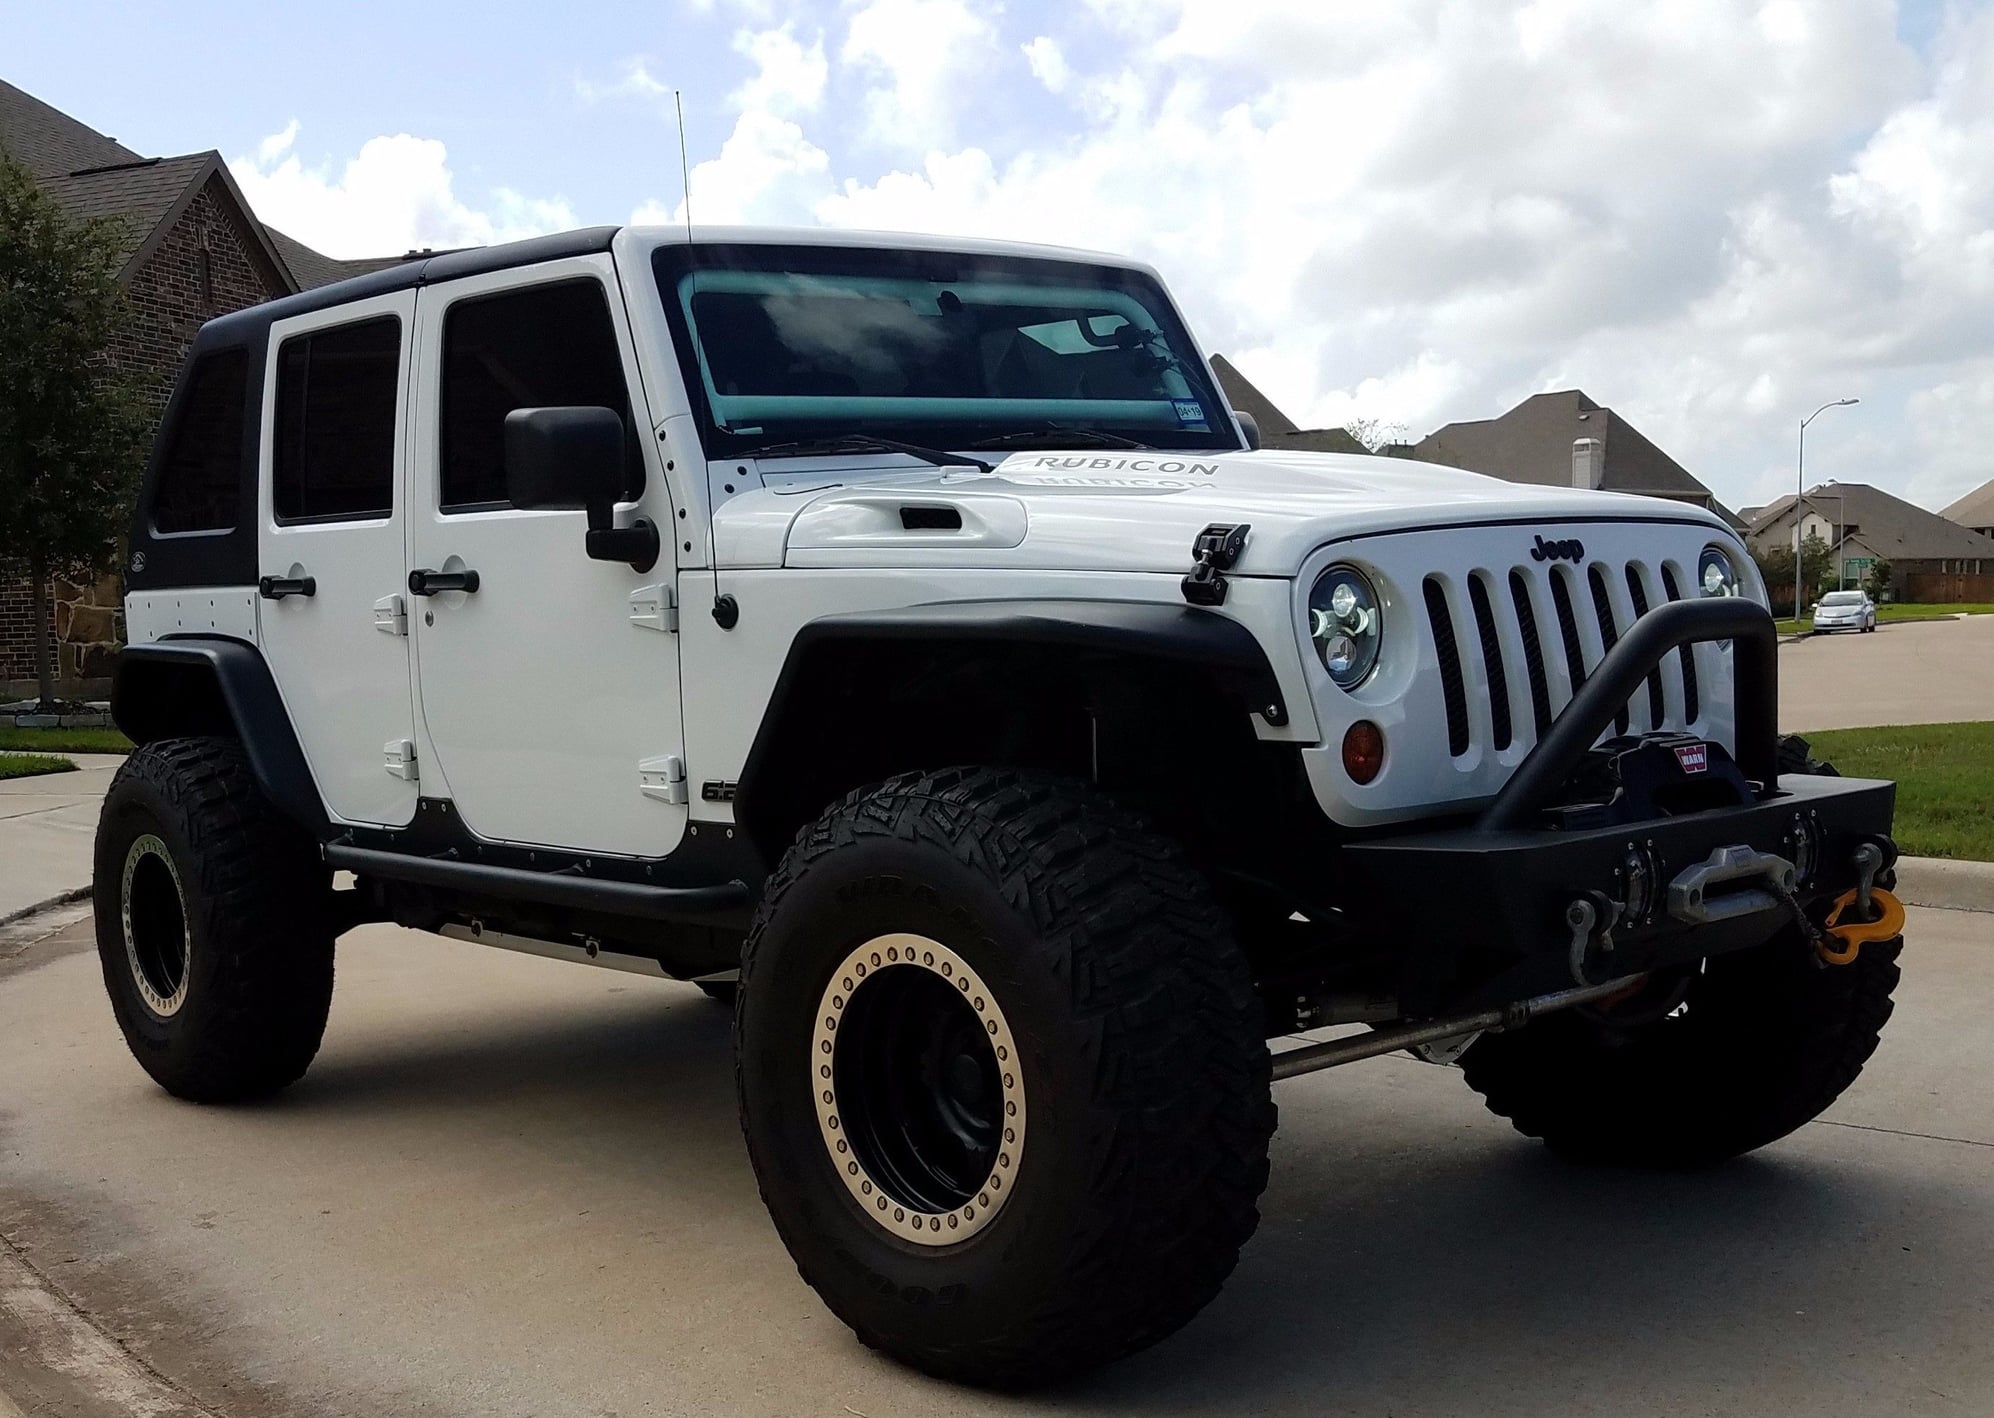 2012 Jeep Wrangler - Hauk Offroad 2012 Rubicon with Motech v8 swap - Used - VIN 1C4HJWFG4CL162420 - 31,000 Miles - 8 cyl - 4WD - Automatic - White - Richmond, TX 77407, United States